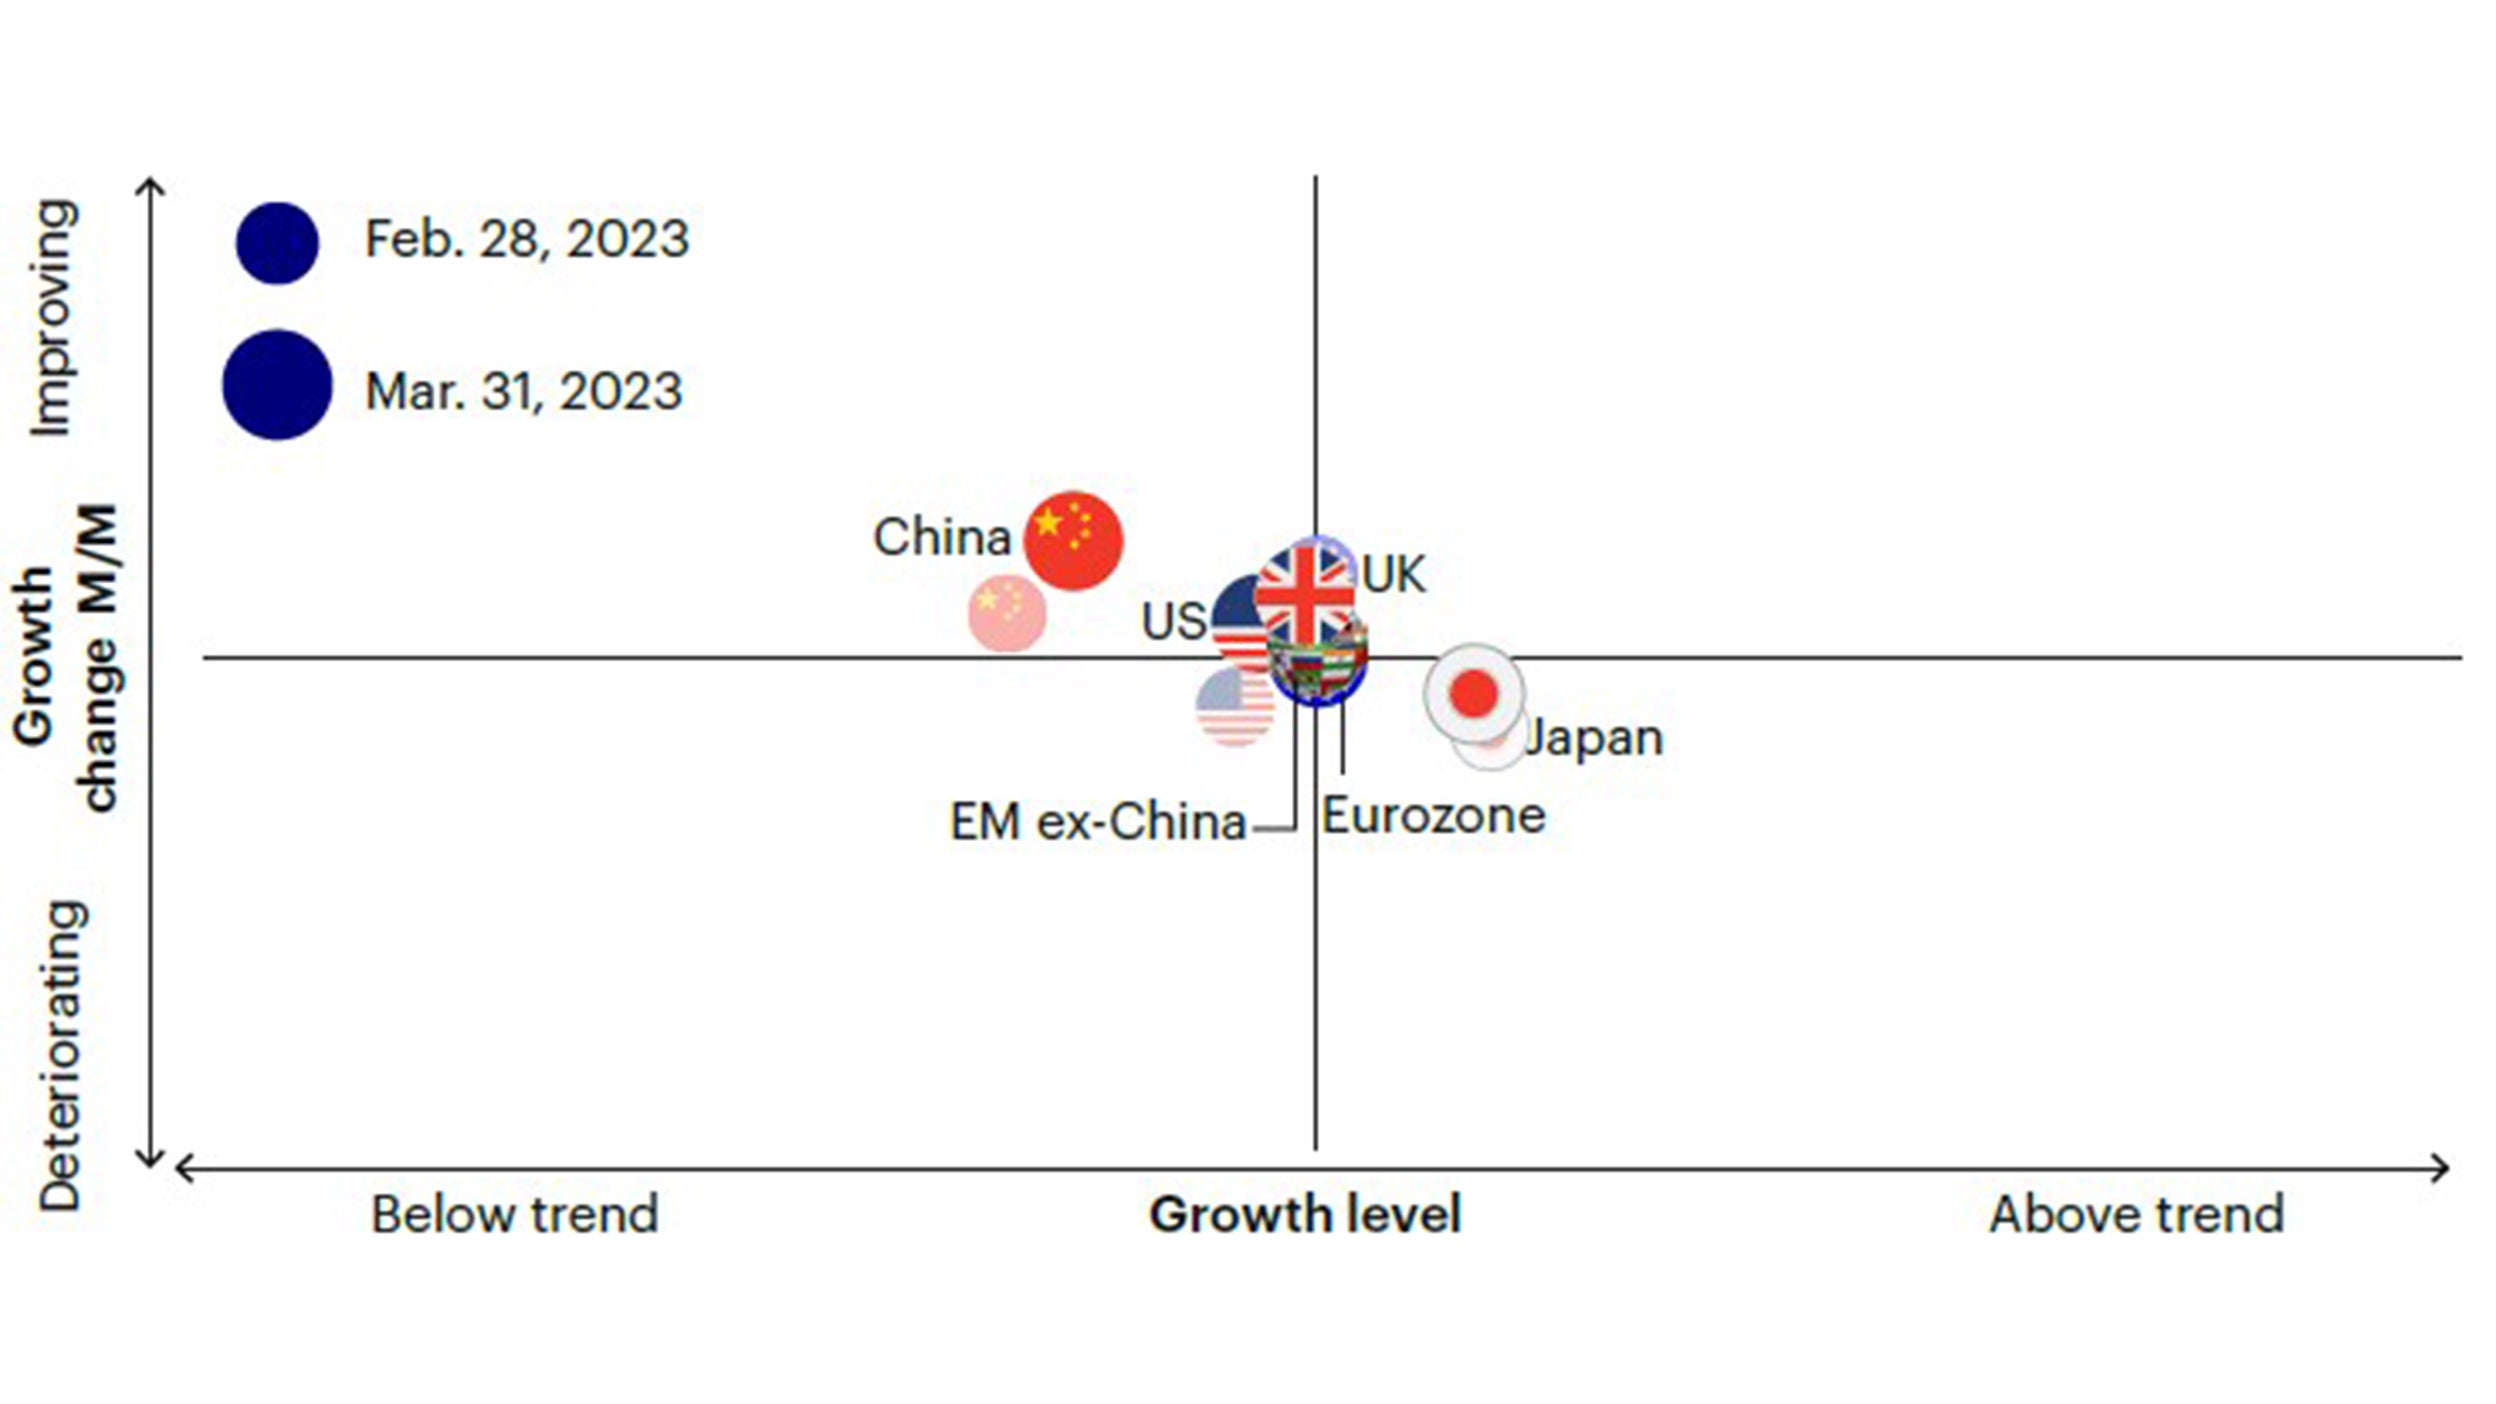 Figure 1b: European leading indicators are stalling, while China and the US have recently improved.